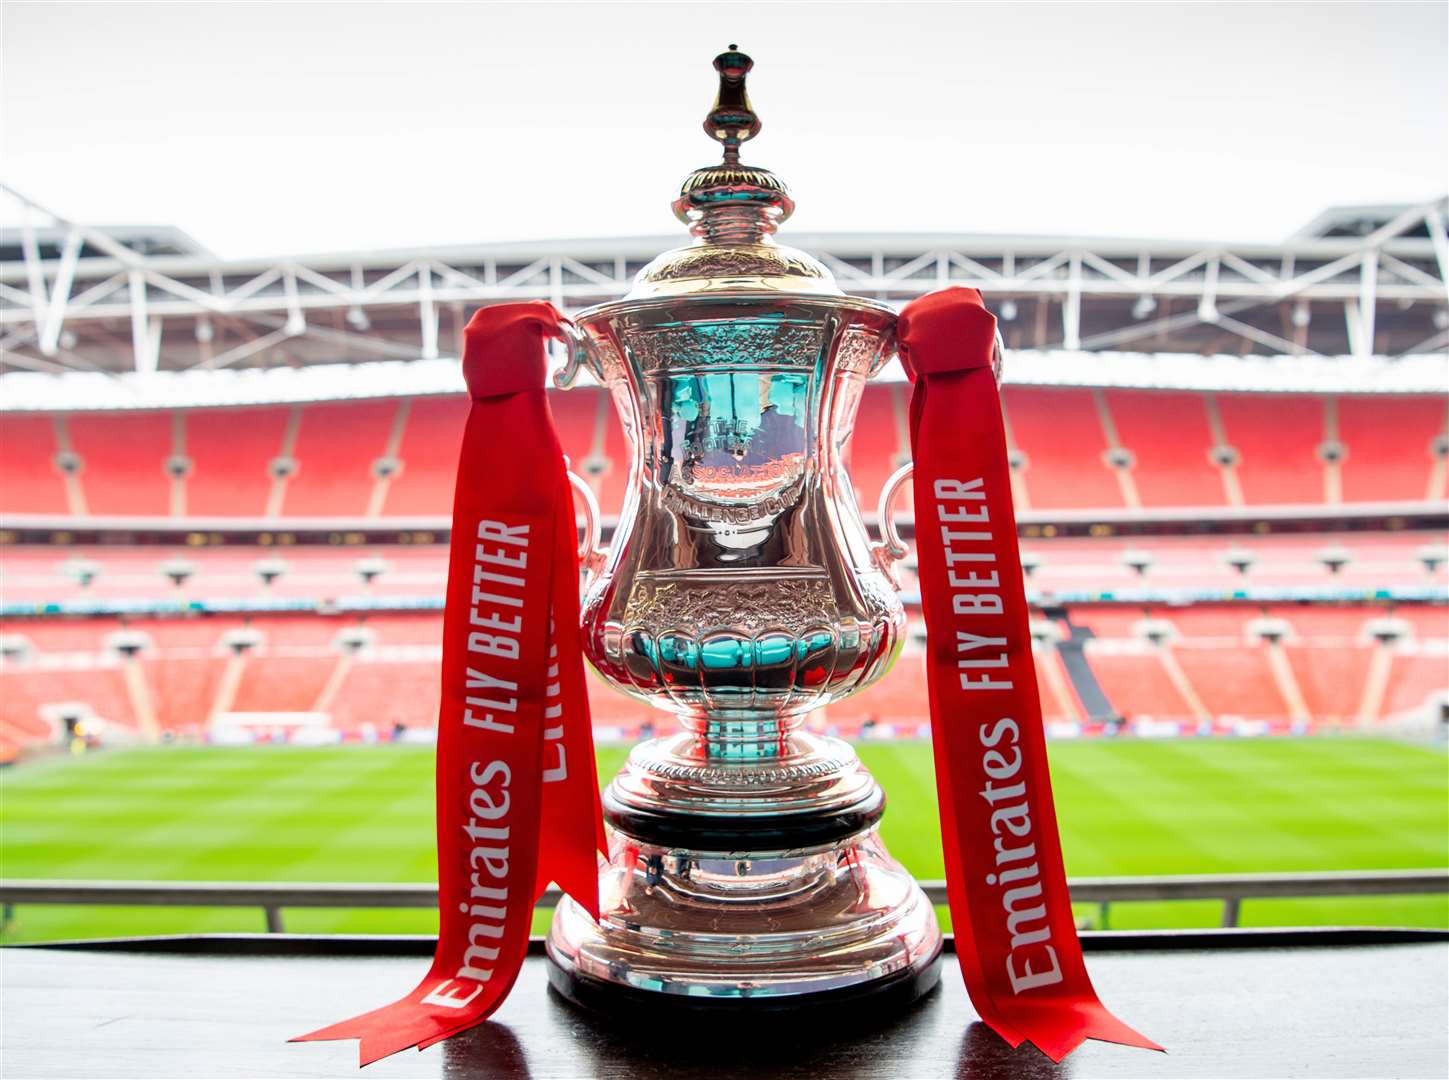 The Emirrates FA Cup trophy which will be contested at Wembley Stadium once again in May Picture: FA